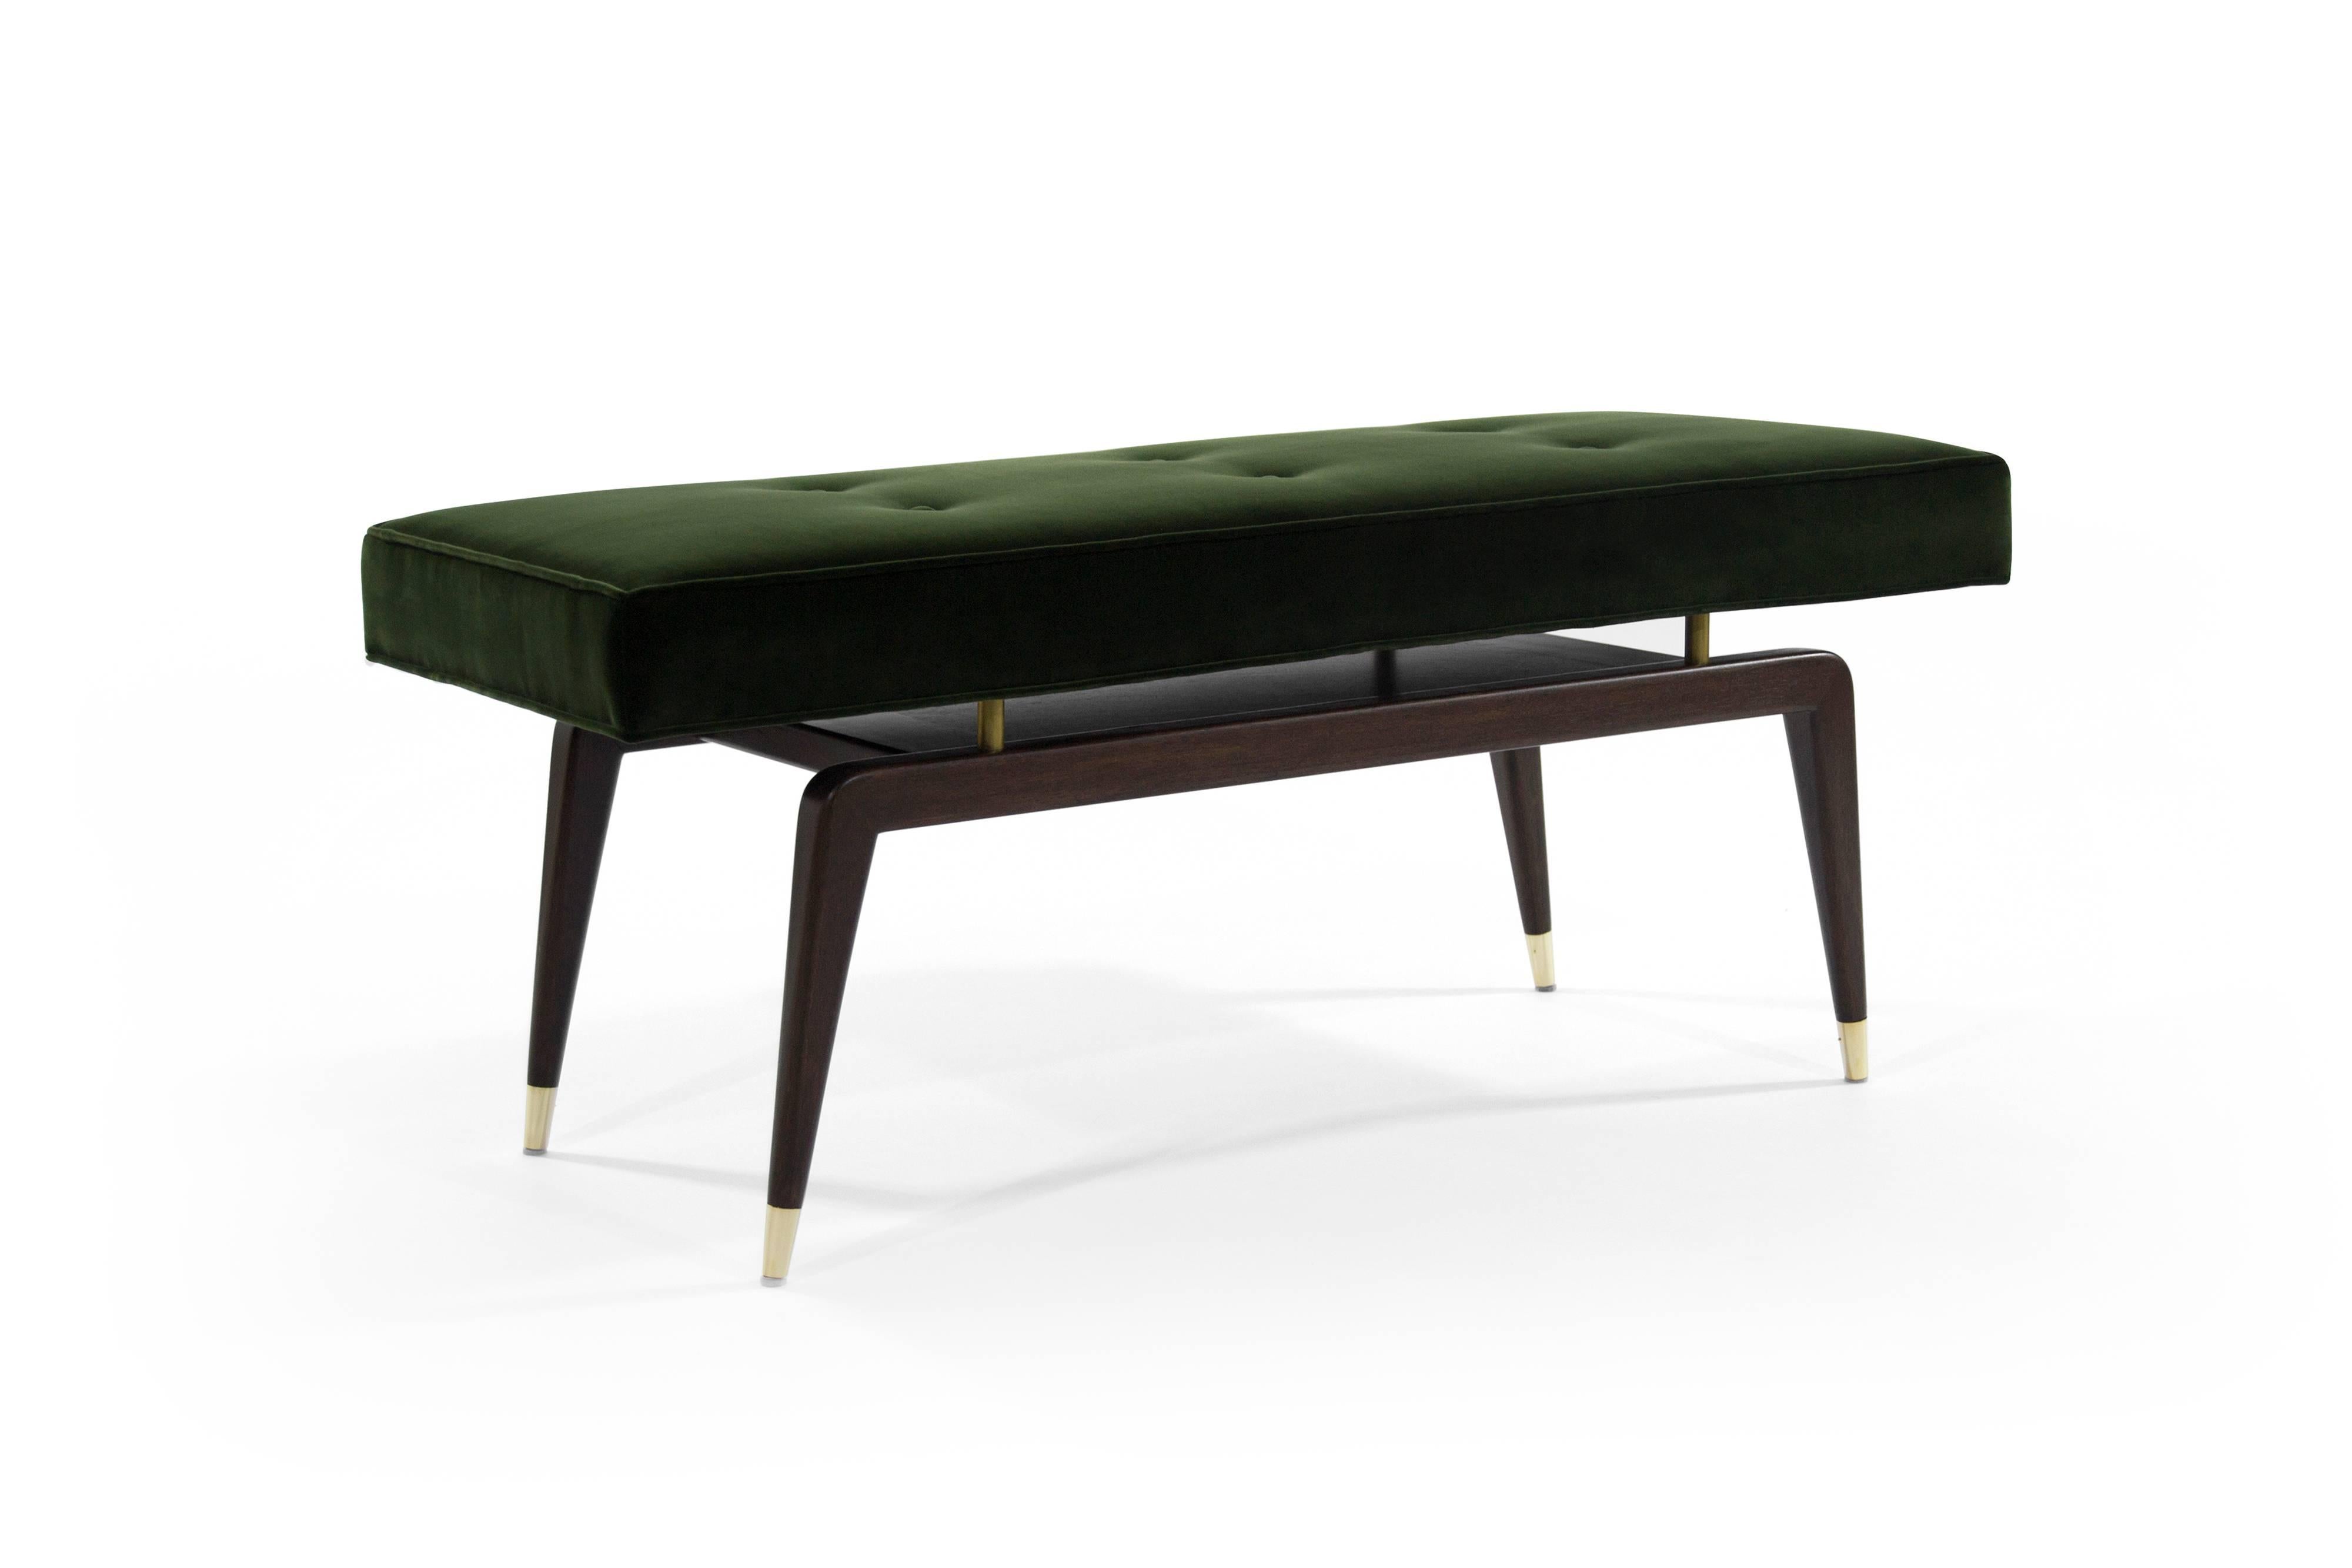 Mid-Century Modern bench in the style of Gio Ponti featuring newly polished brass risers and sabots. Walnut base fully restored, newly upholstered in olive velvet.